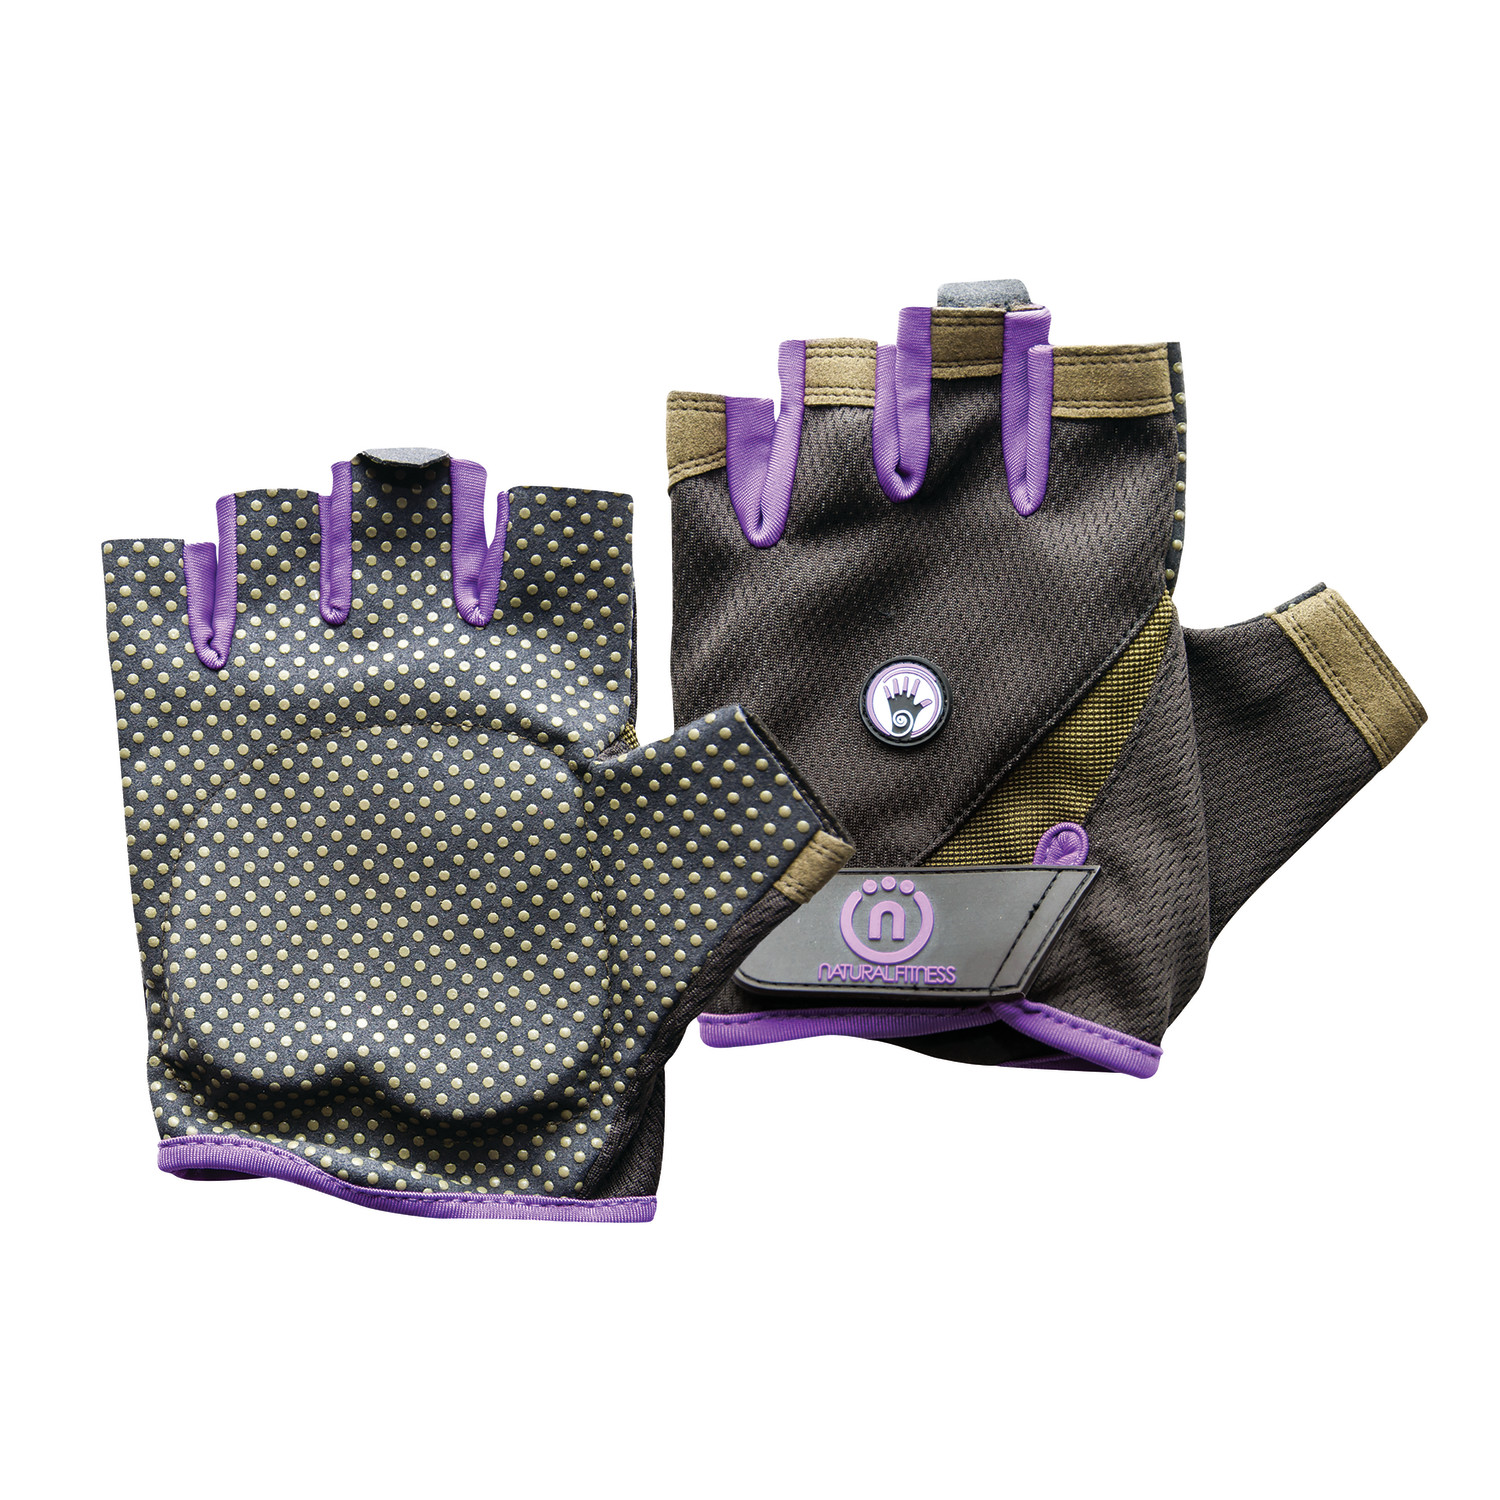 Natural Fitness Wrist Assist Gloves for Extra Support Needed During Yoga, Pilates, Weight-Training, and More ? Large - image 3 of 3